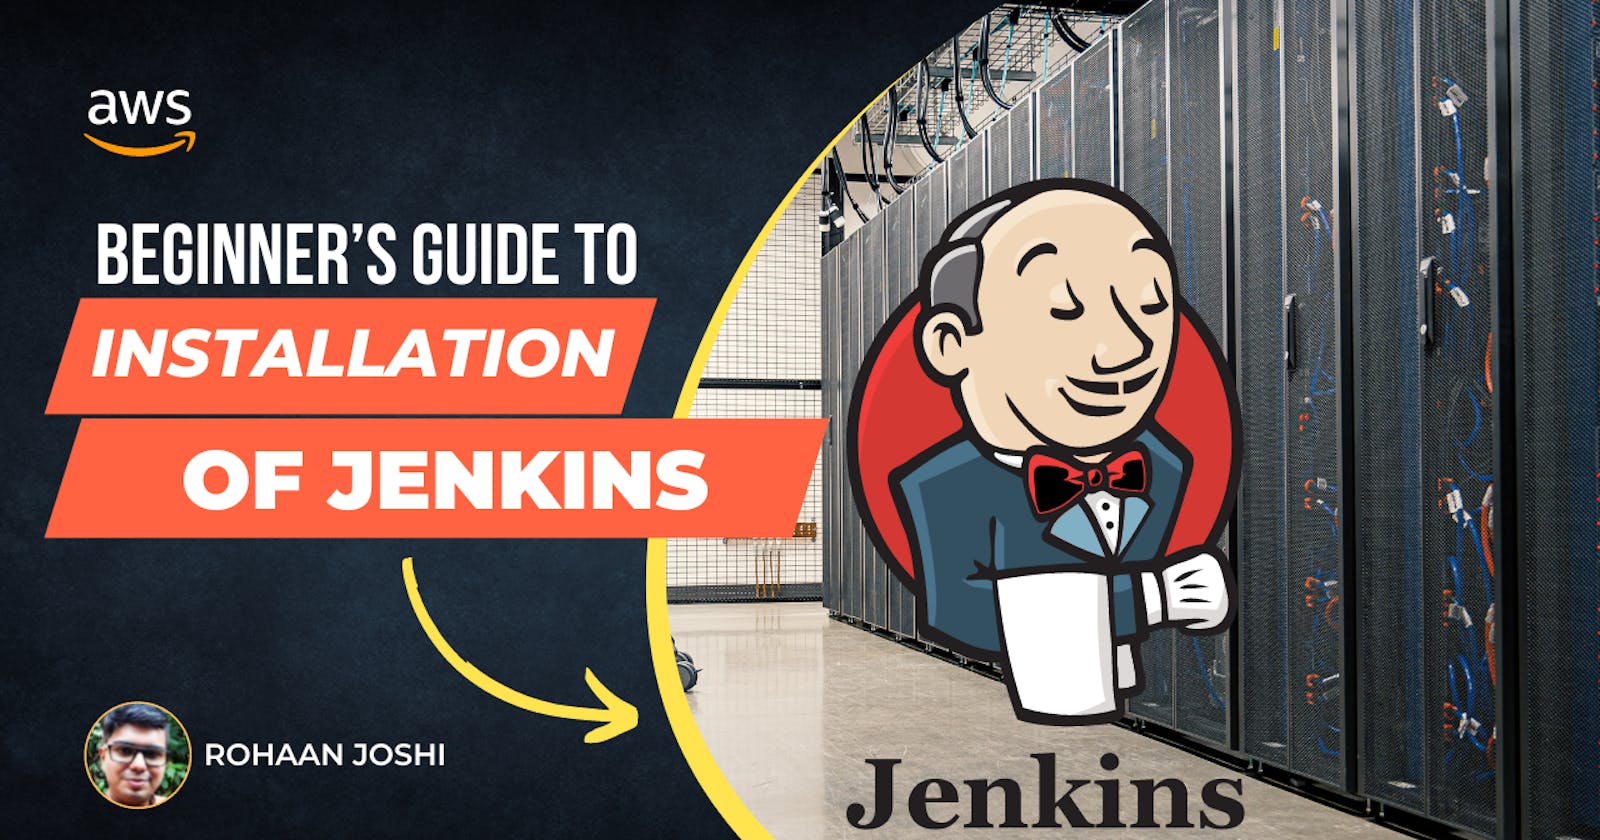 Beginner's guide to installation of Jenkins